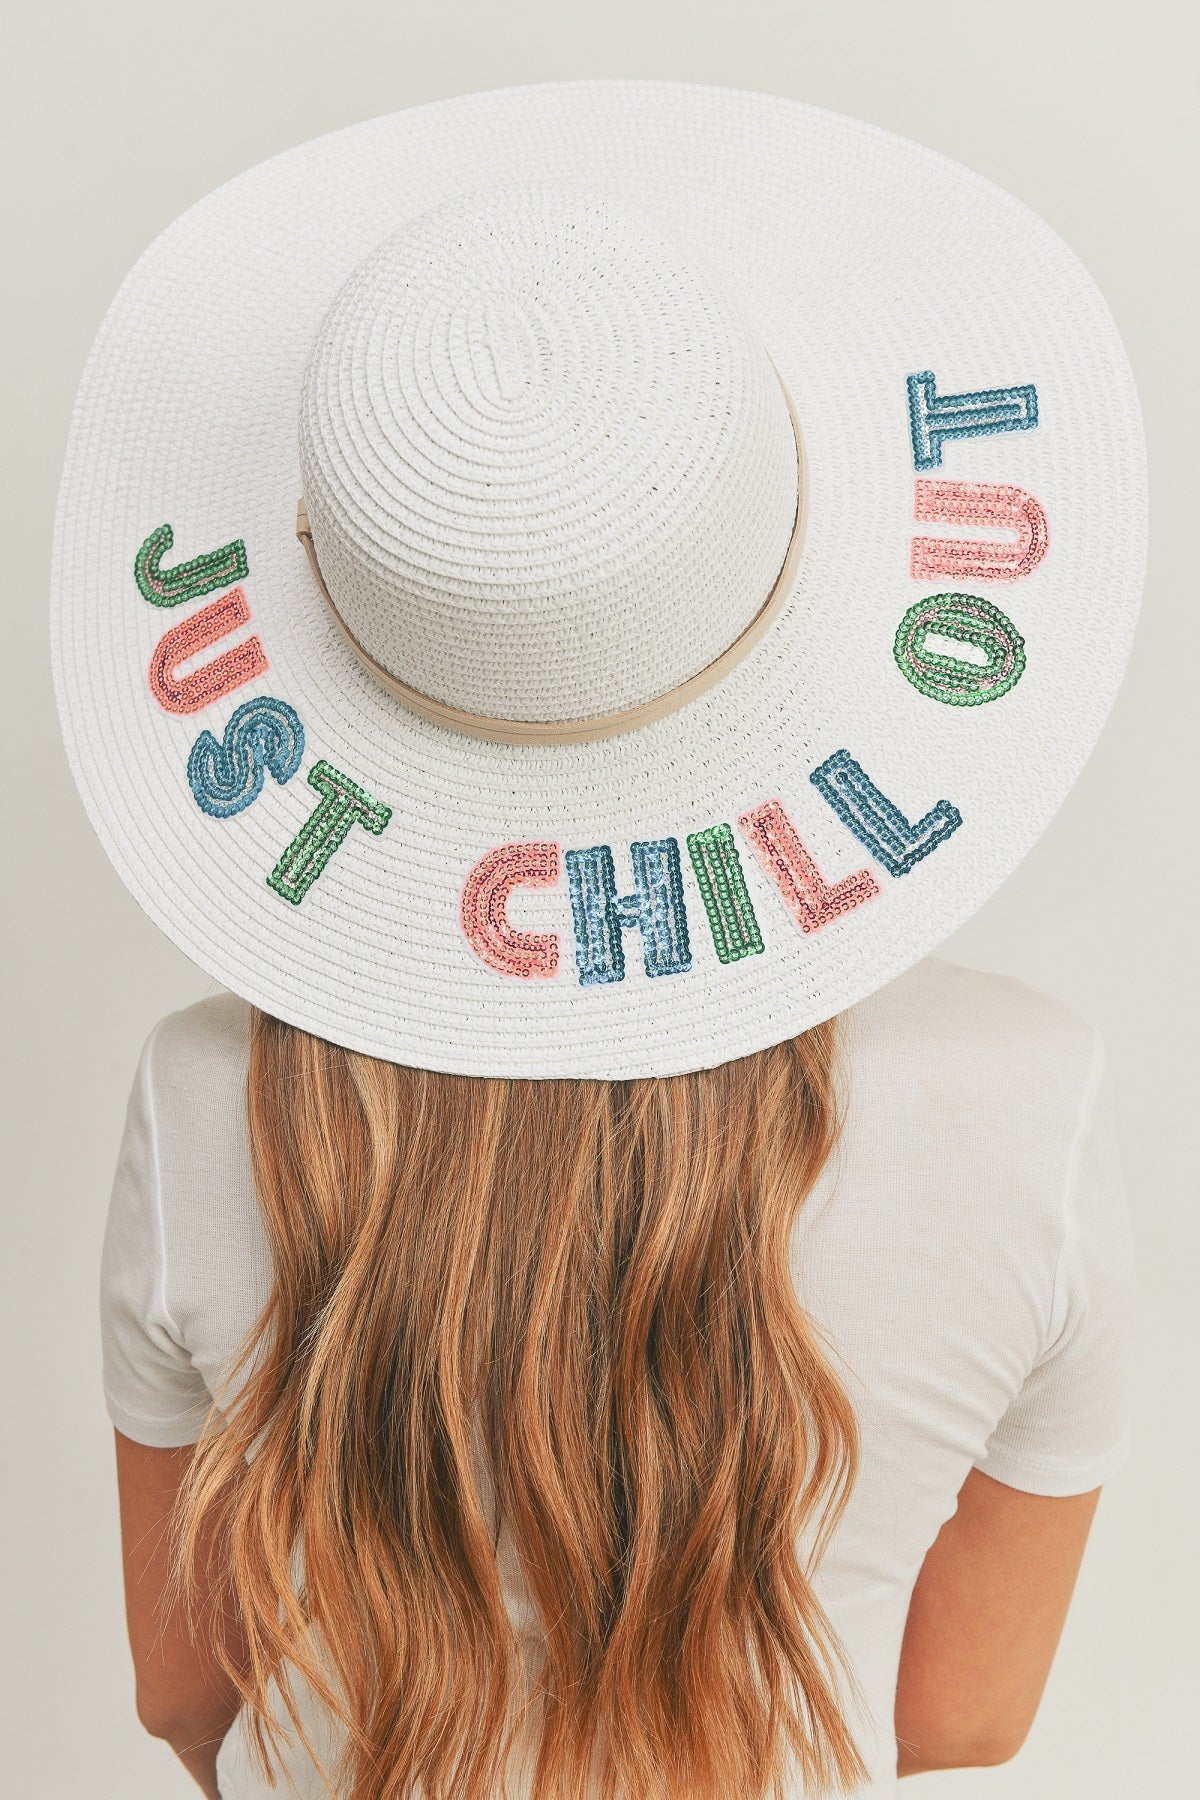 MH0122 Sequin Letter "Just Chill Out" Floppy Hat